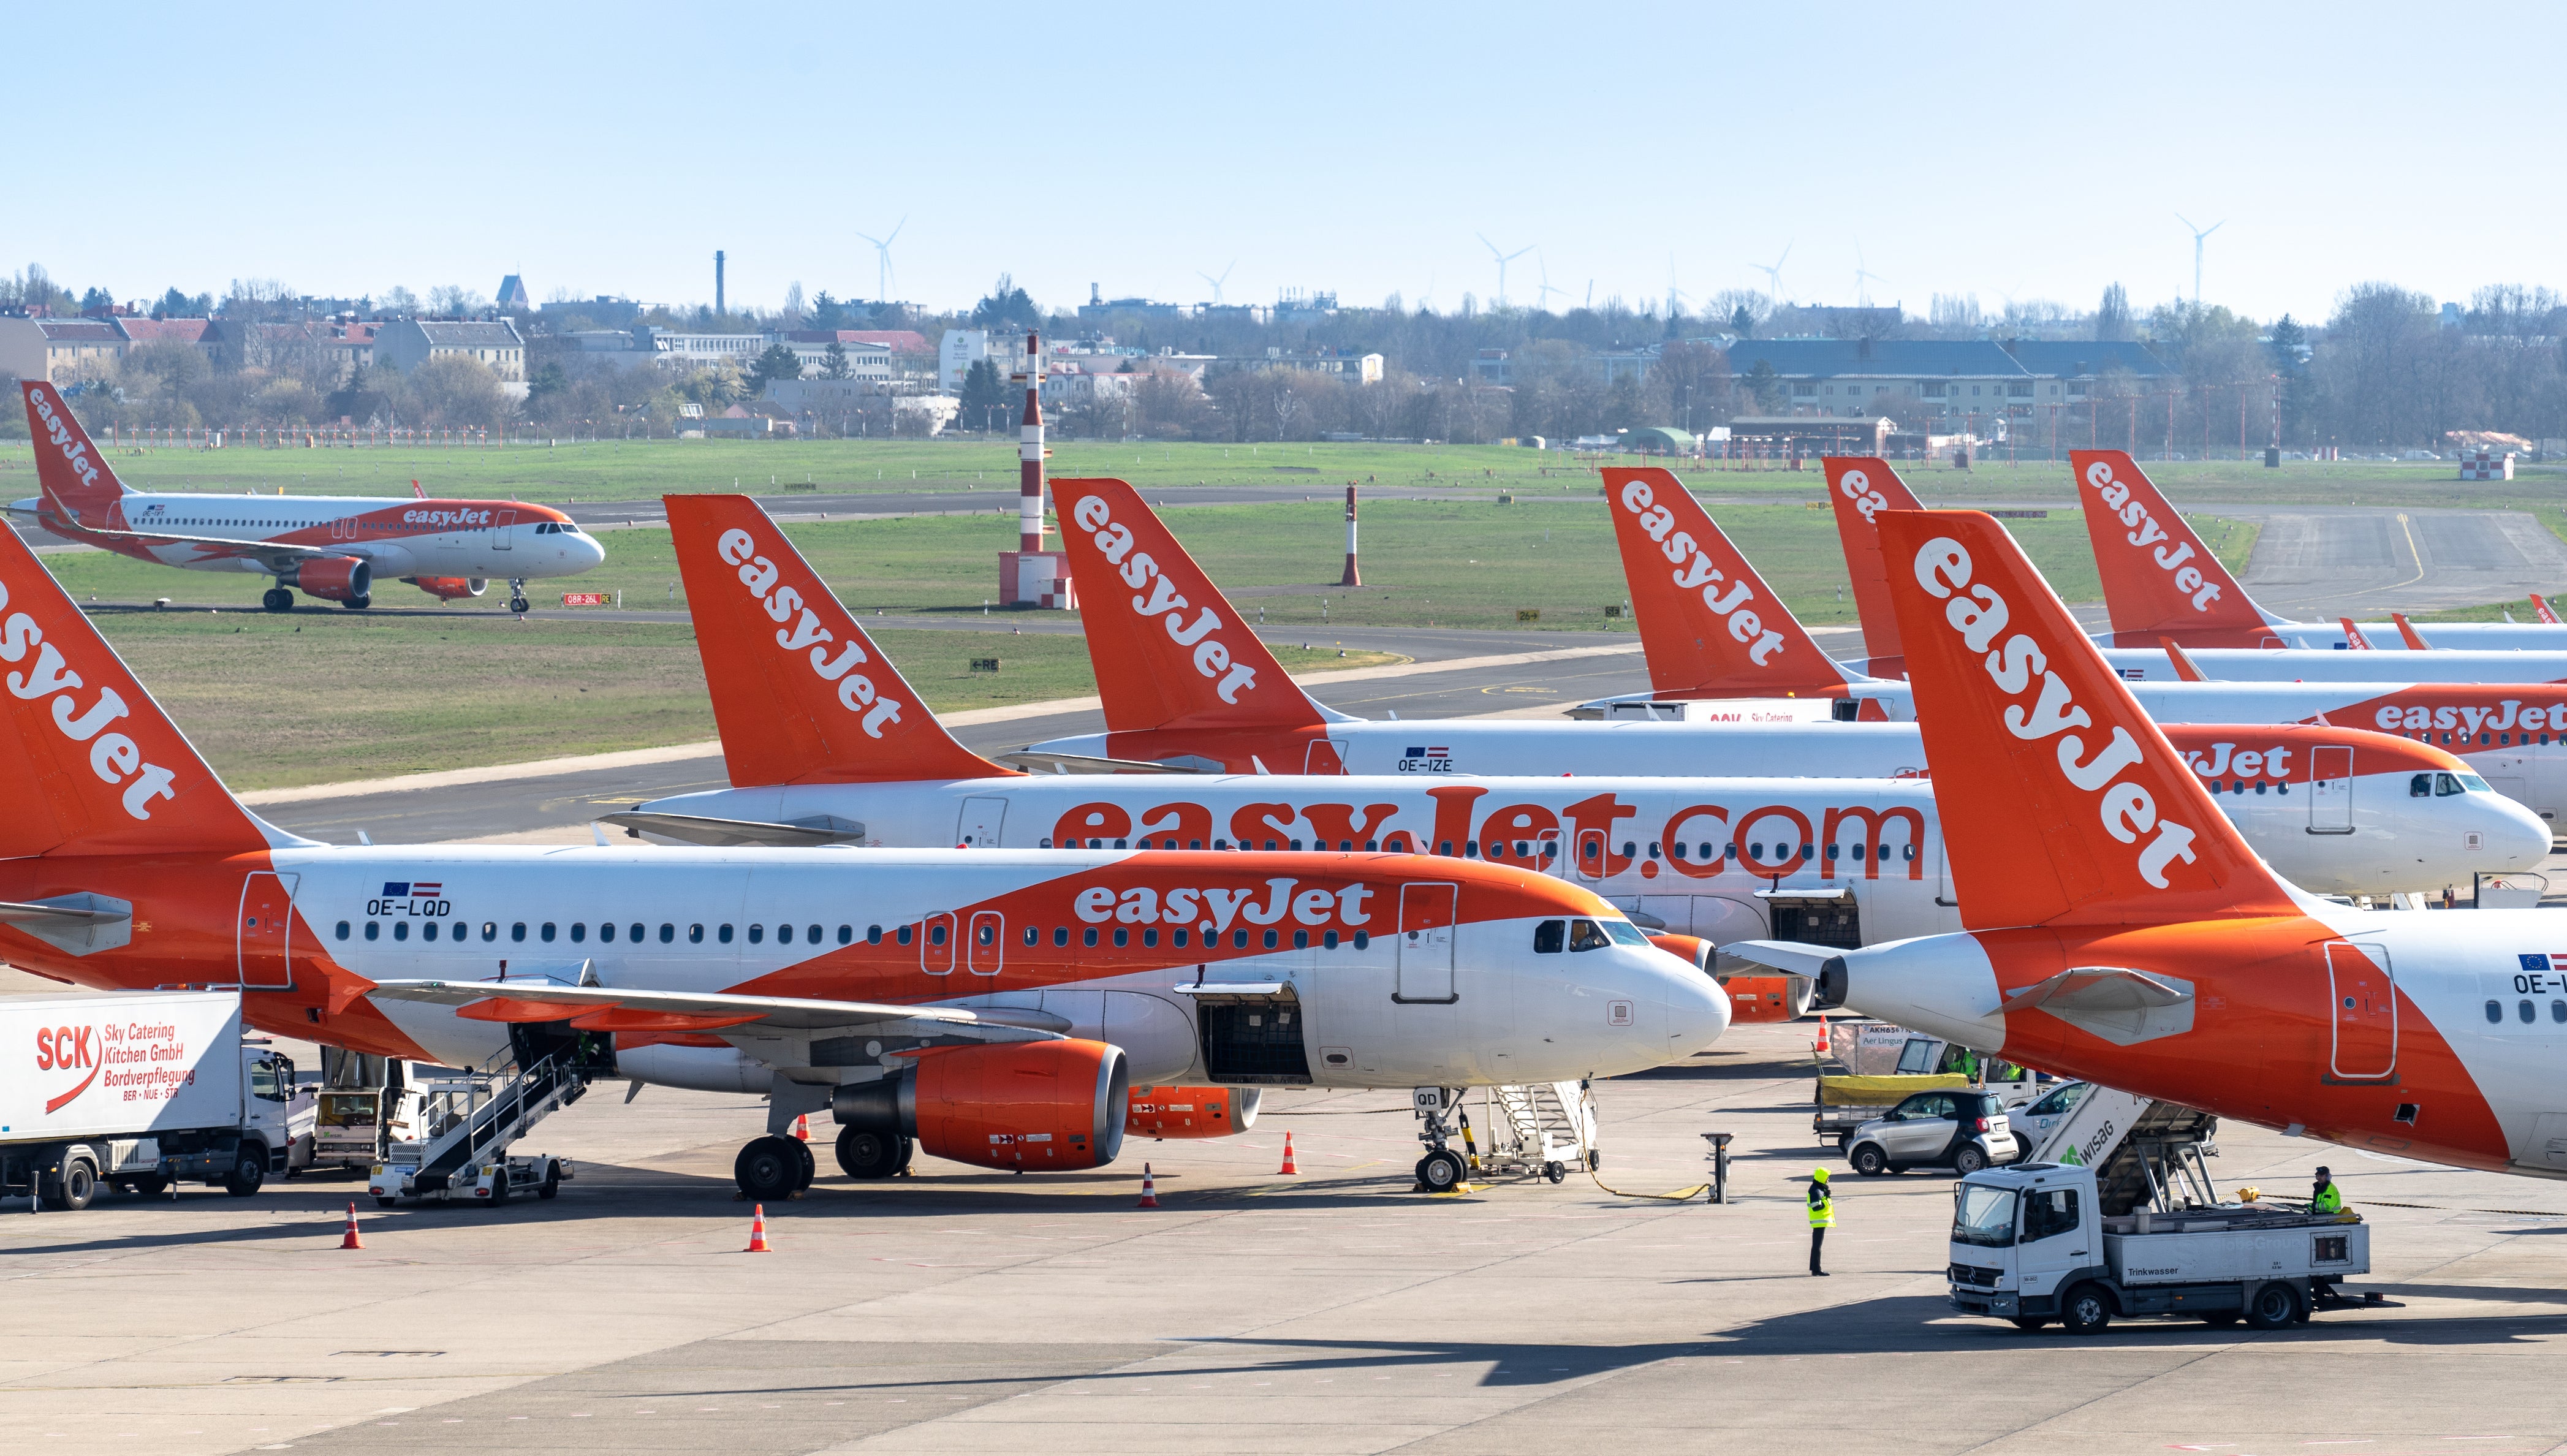 EasyJet said the issue was in error